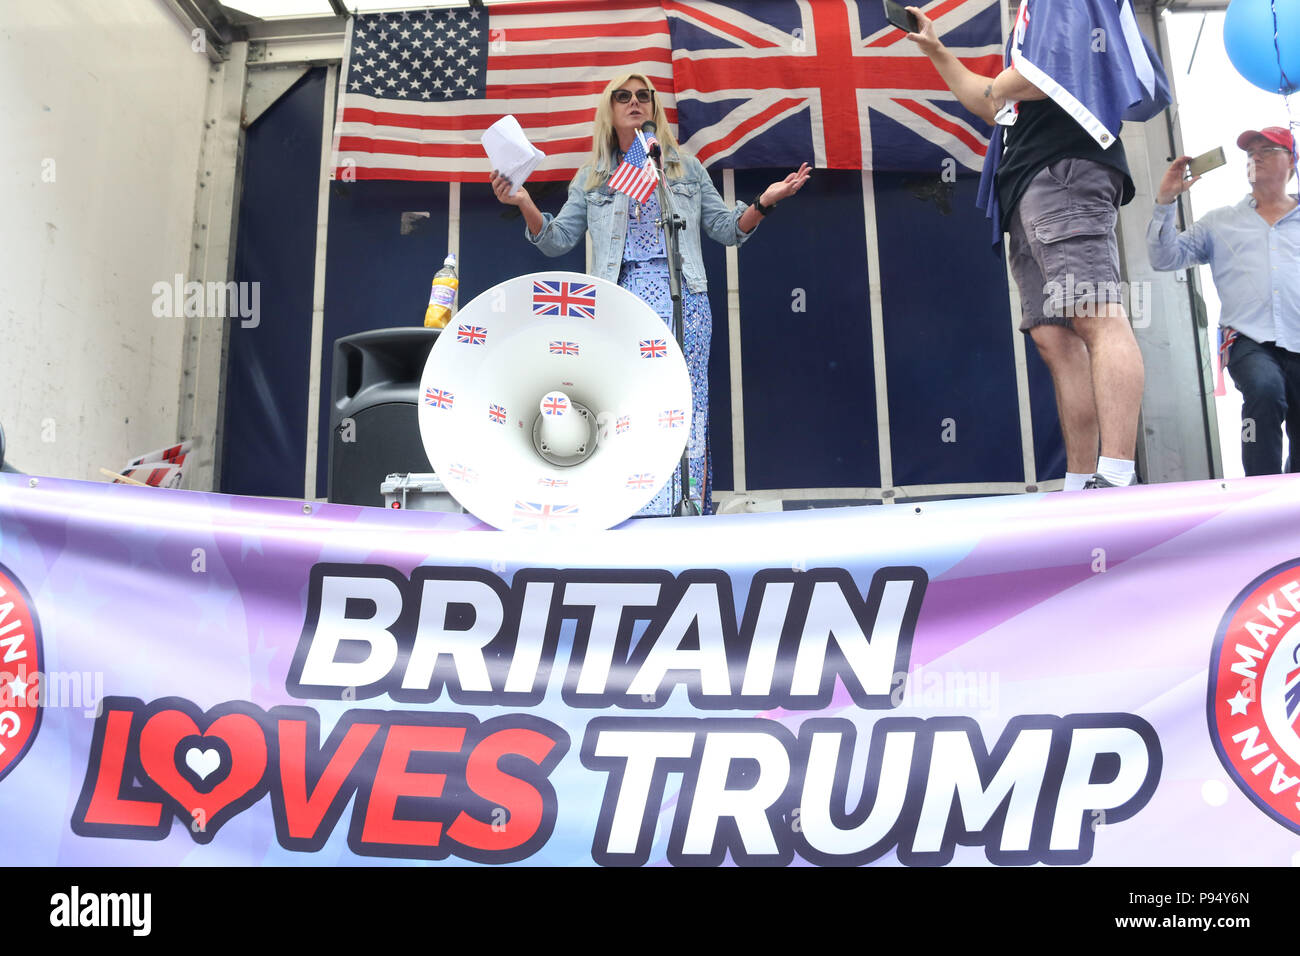 London, England. 14th 2018. Pictured: Debbie Robinson (Australian Liberty Alliance). Despite police attempts prevent the pro-Trump protest due to fears of violence from far-left counter protesters, supporters Donald Trump